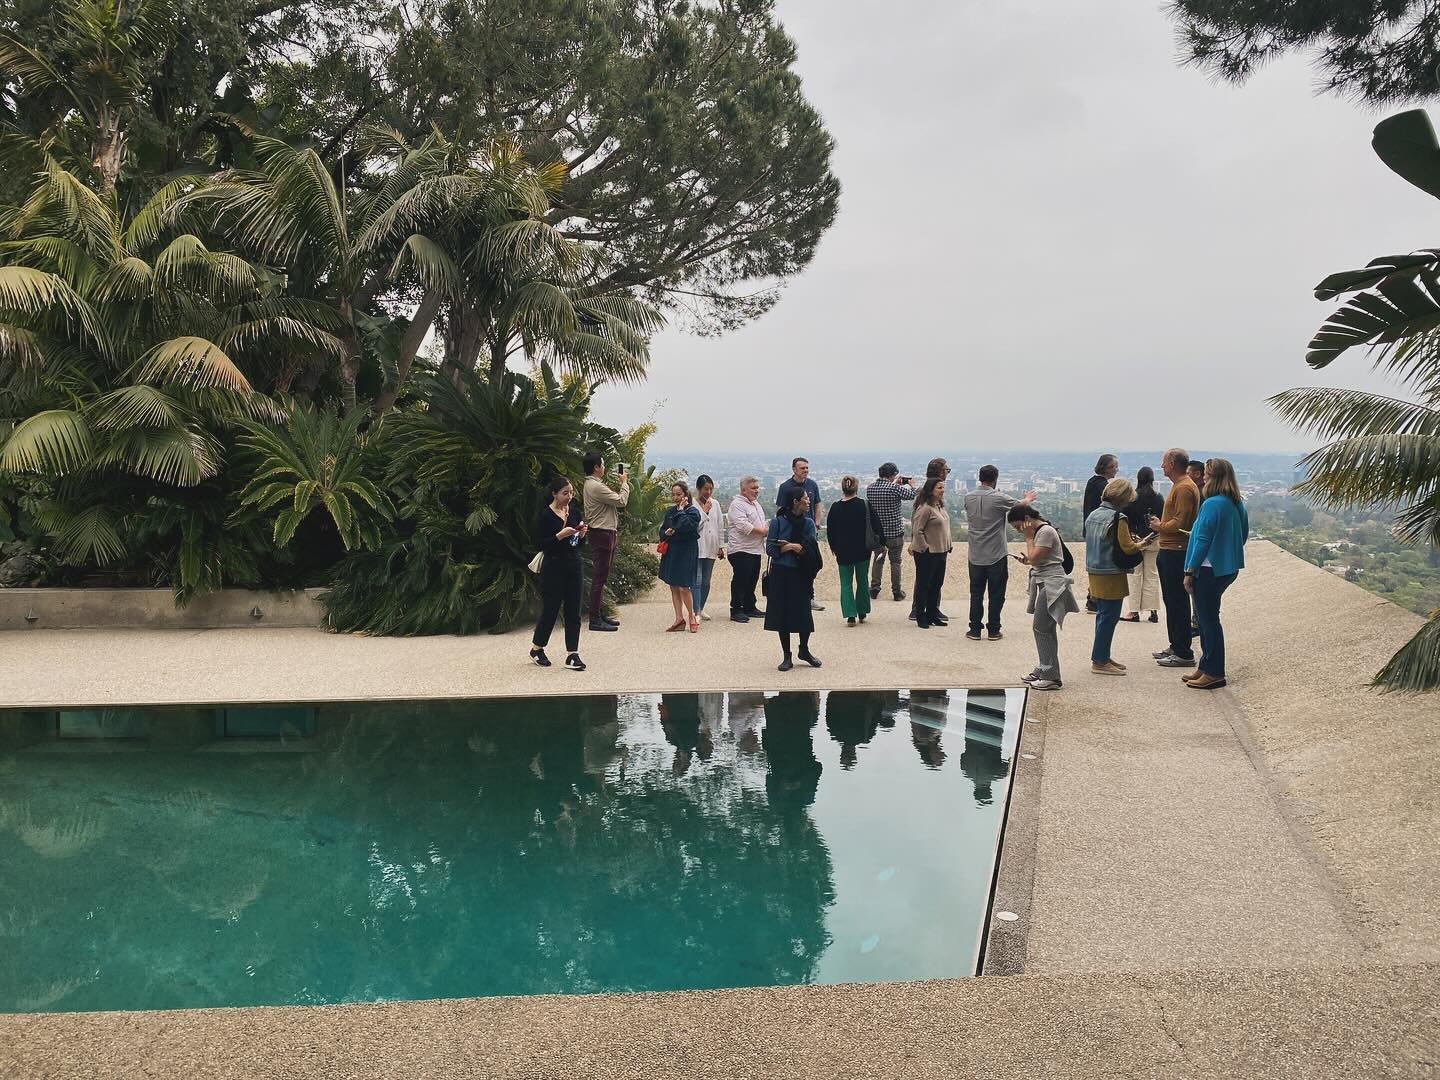 Highlights from today&rsquo;s tour with @aia_la for their #springarchtourfest2024 at the #goldsteinresidence 
.
.
.
#johnlautner #sheatsgoldsteinresidence #clubjames #architecture #organicarchitecture #modernarchitecture #losangeles #beverlyhills #ar